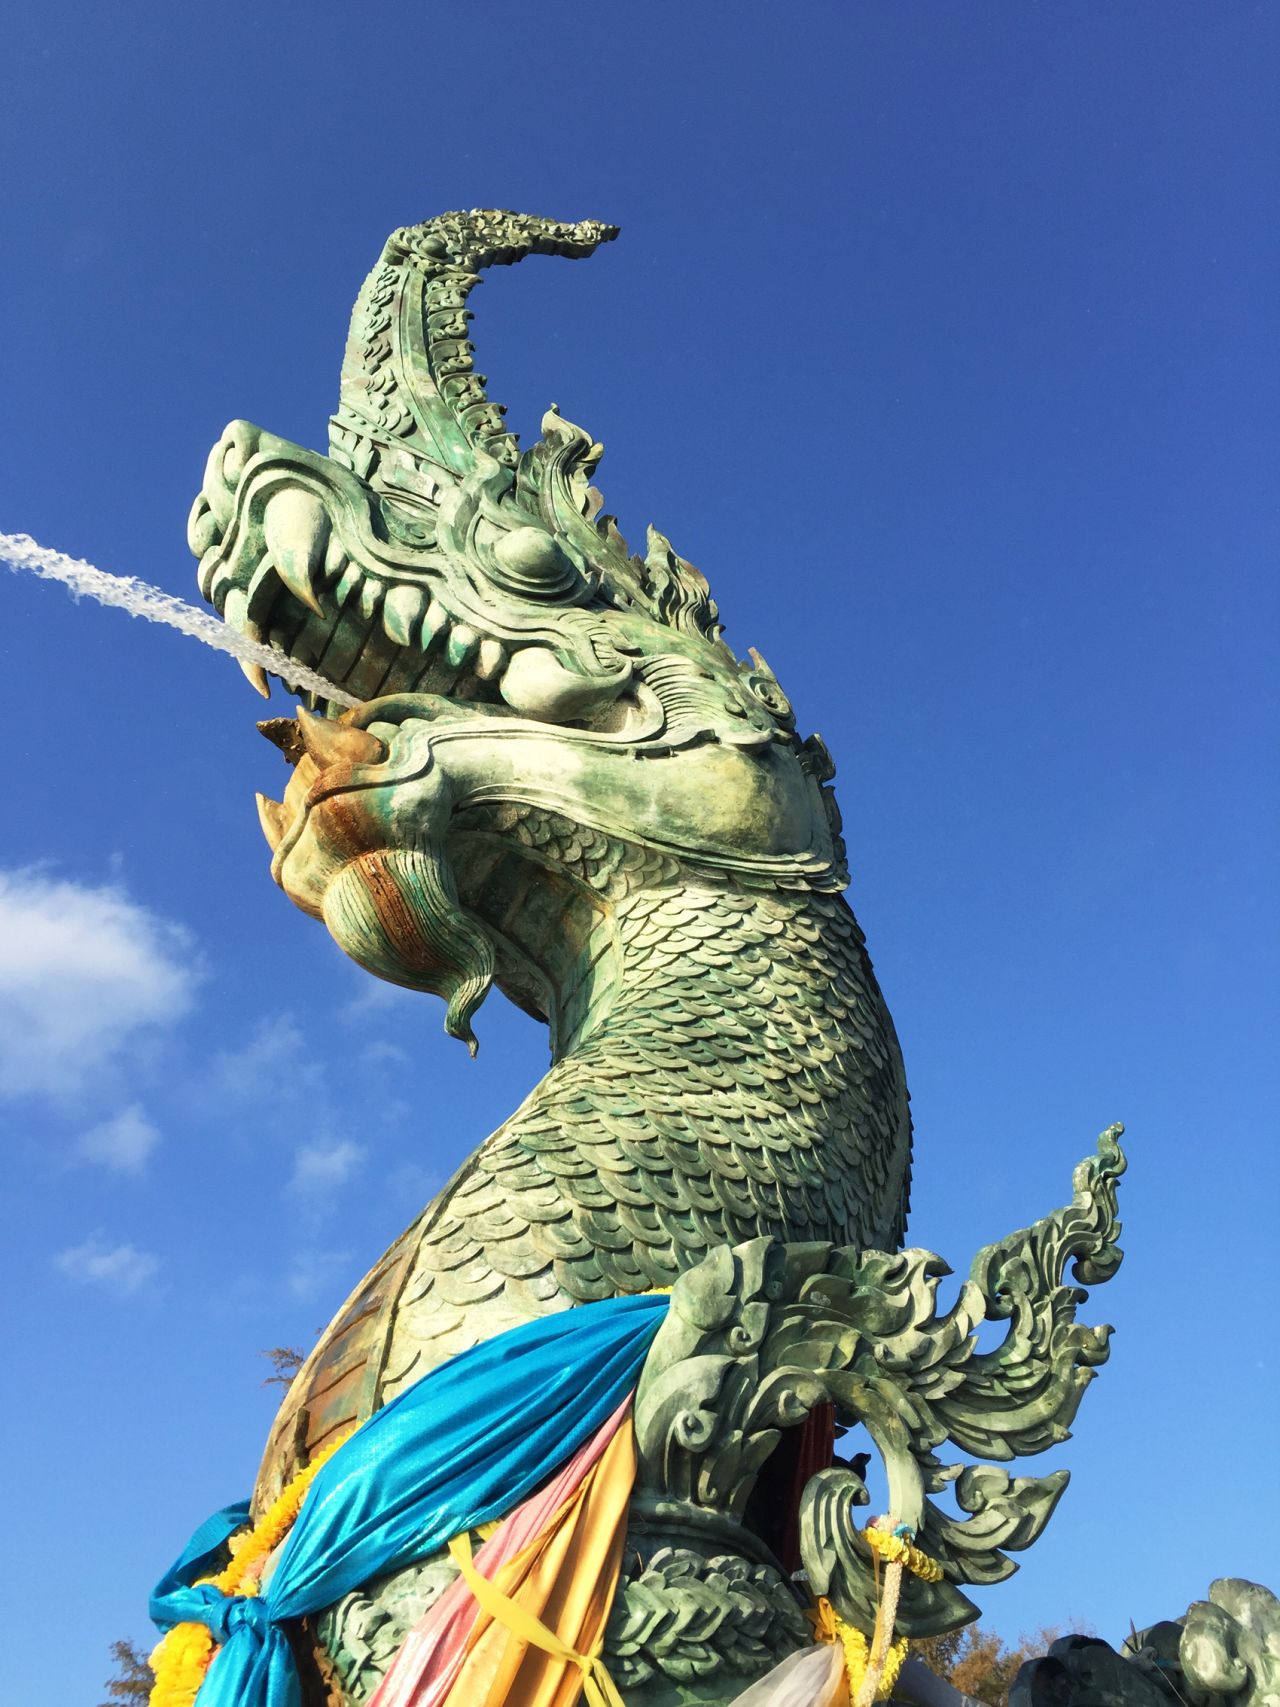 The Naga Head ("dragonhead") statue is the centerpiece of Song Thale Park near Songkhla Lake.